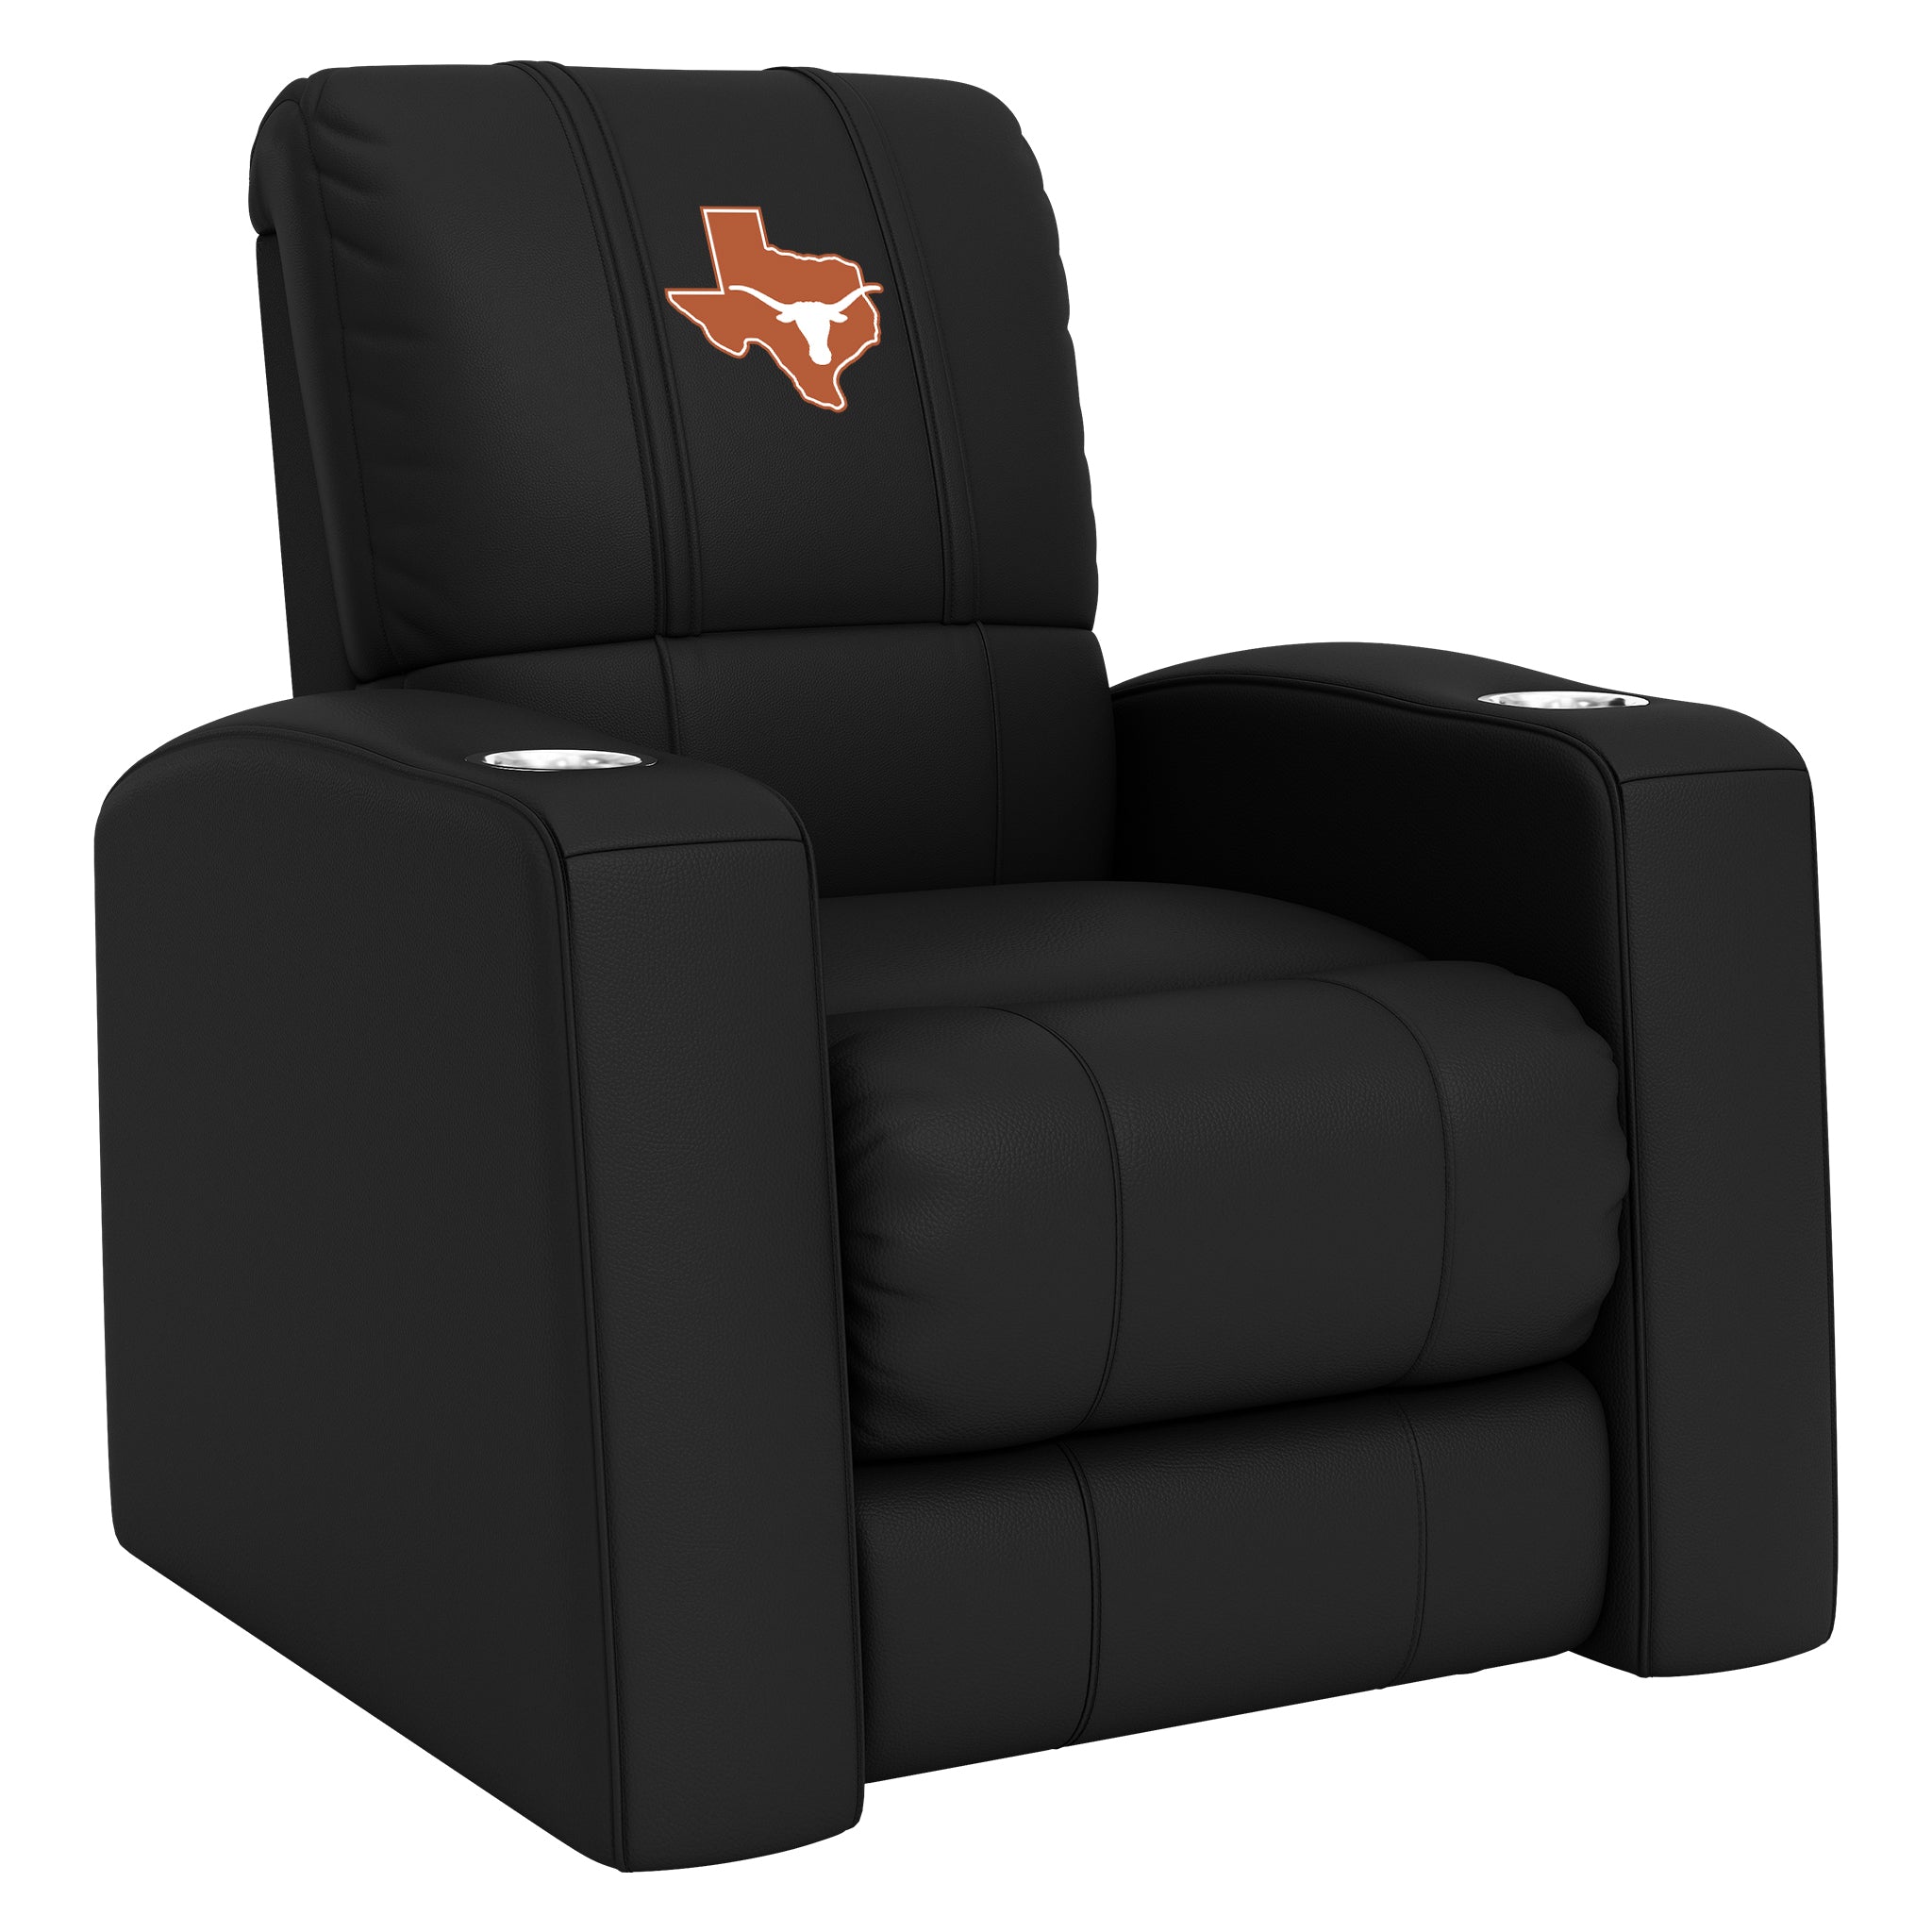 Texas Longhorns Home Theater Recliner with Texas Longhorns Secondary